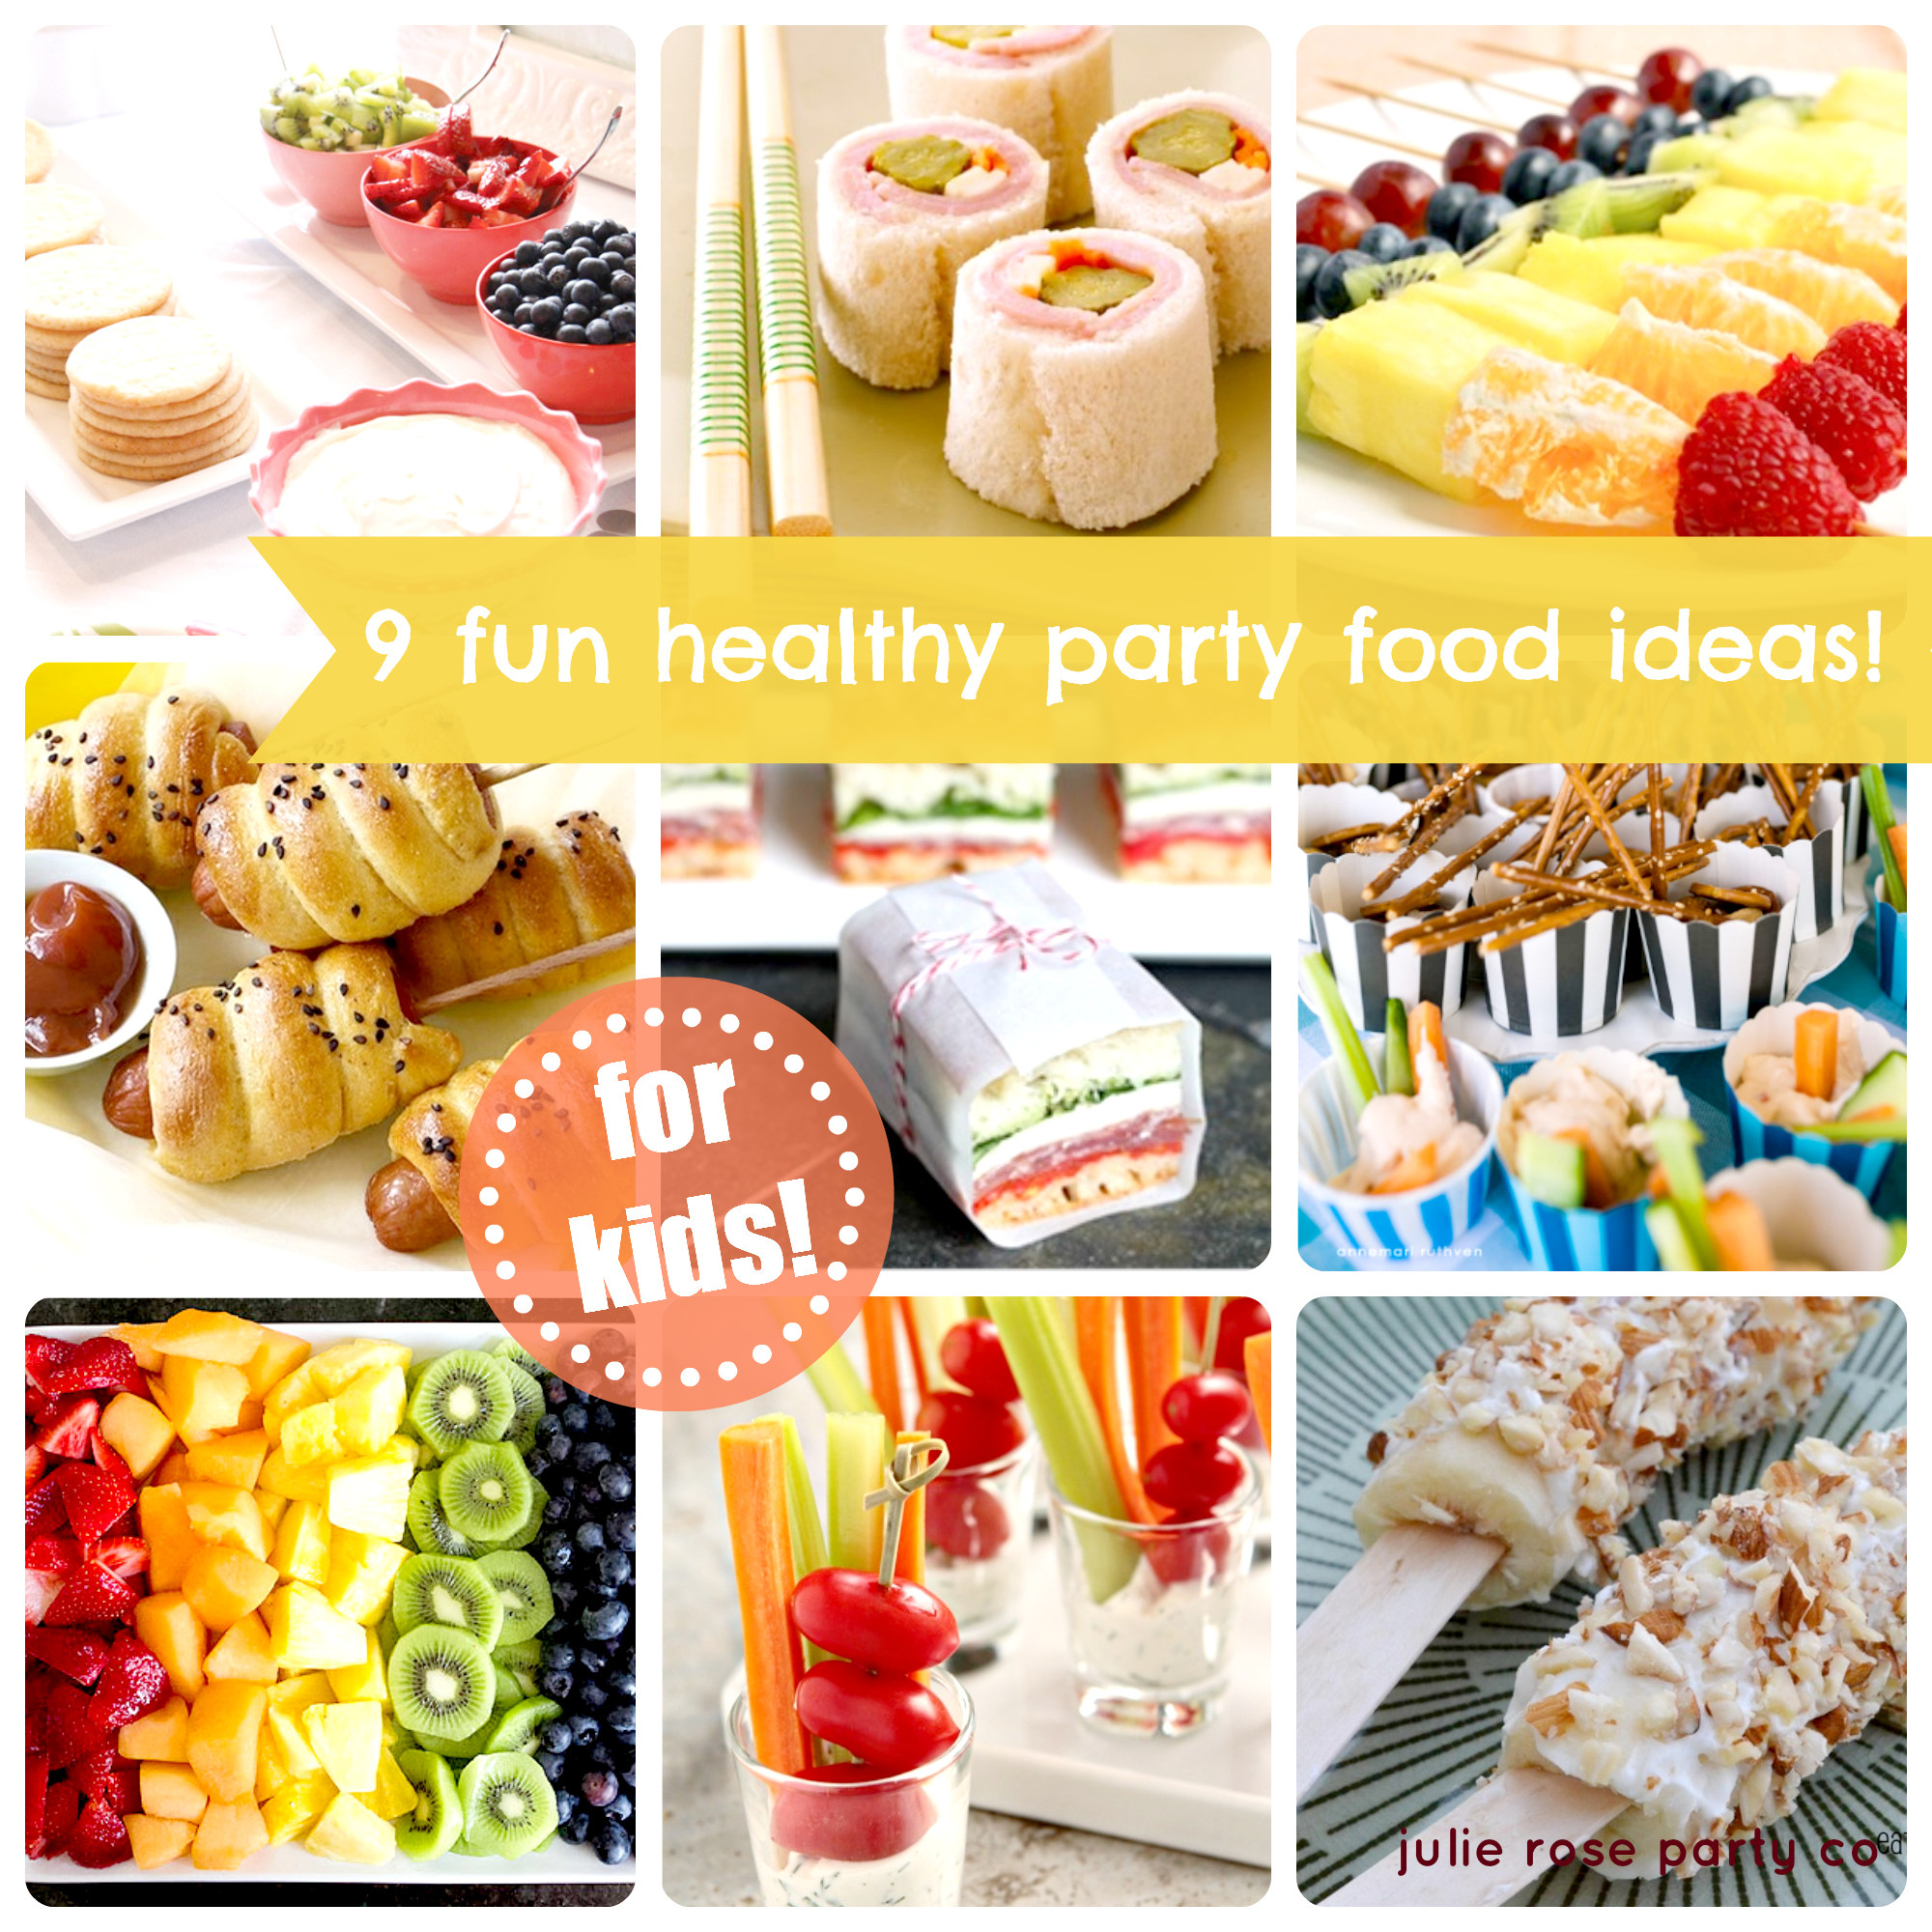 Party Snacks For Kids
 9 fun and healthy party food ideas kids